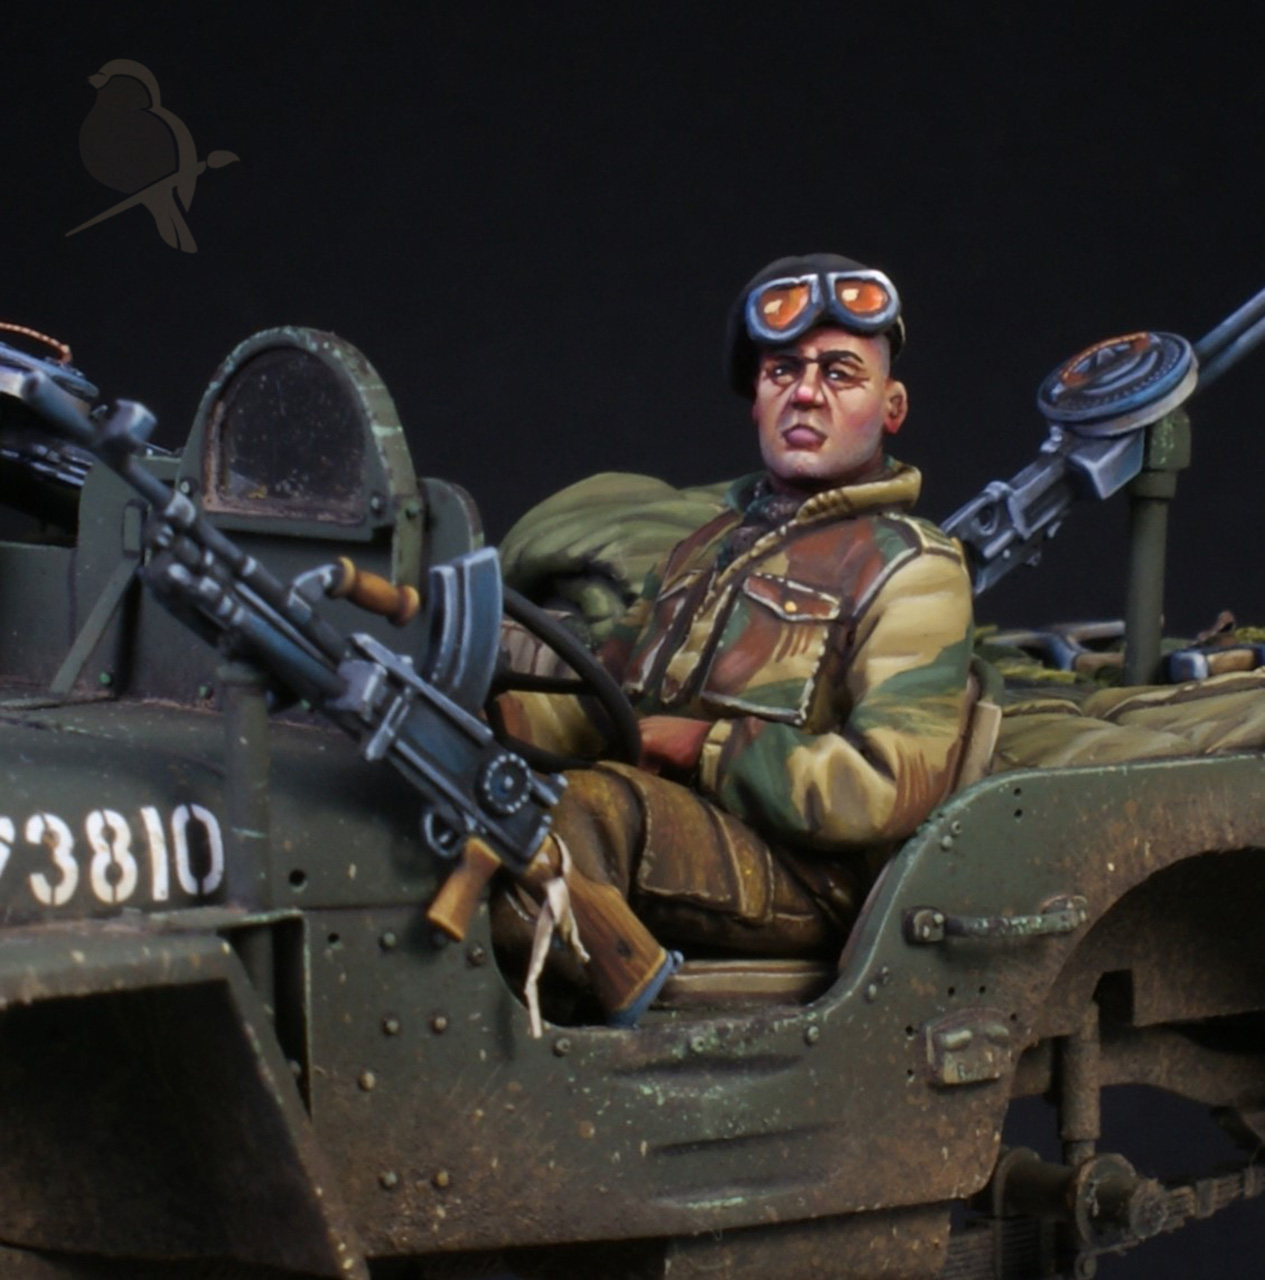 Dioramas and Vignettes: The best choise for SAS, photo #23